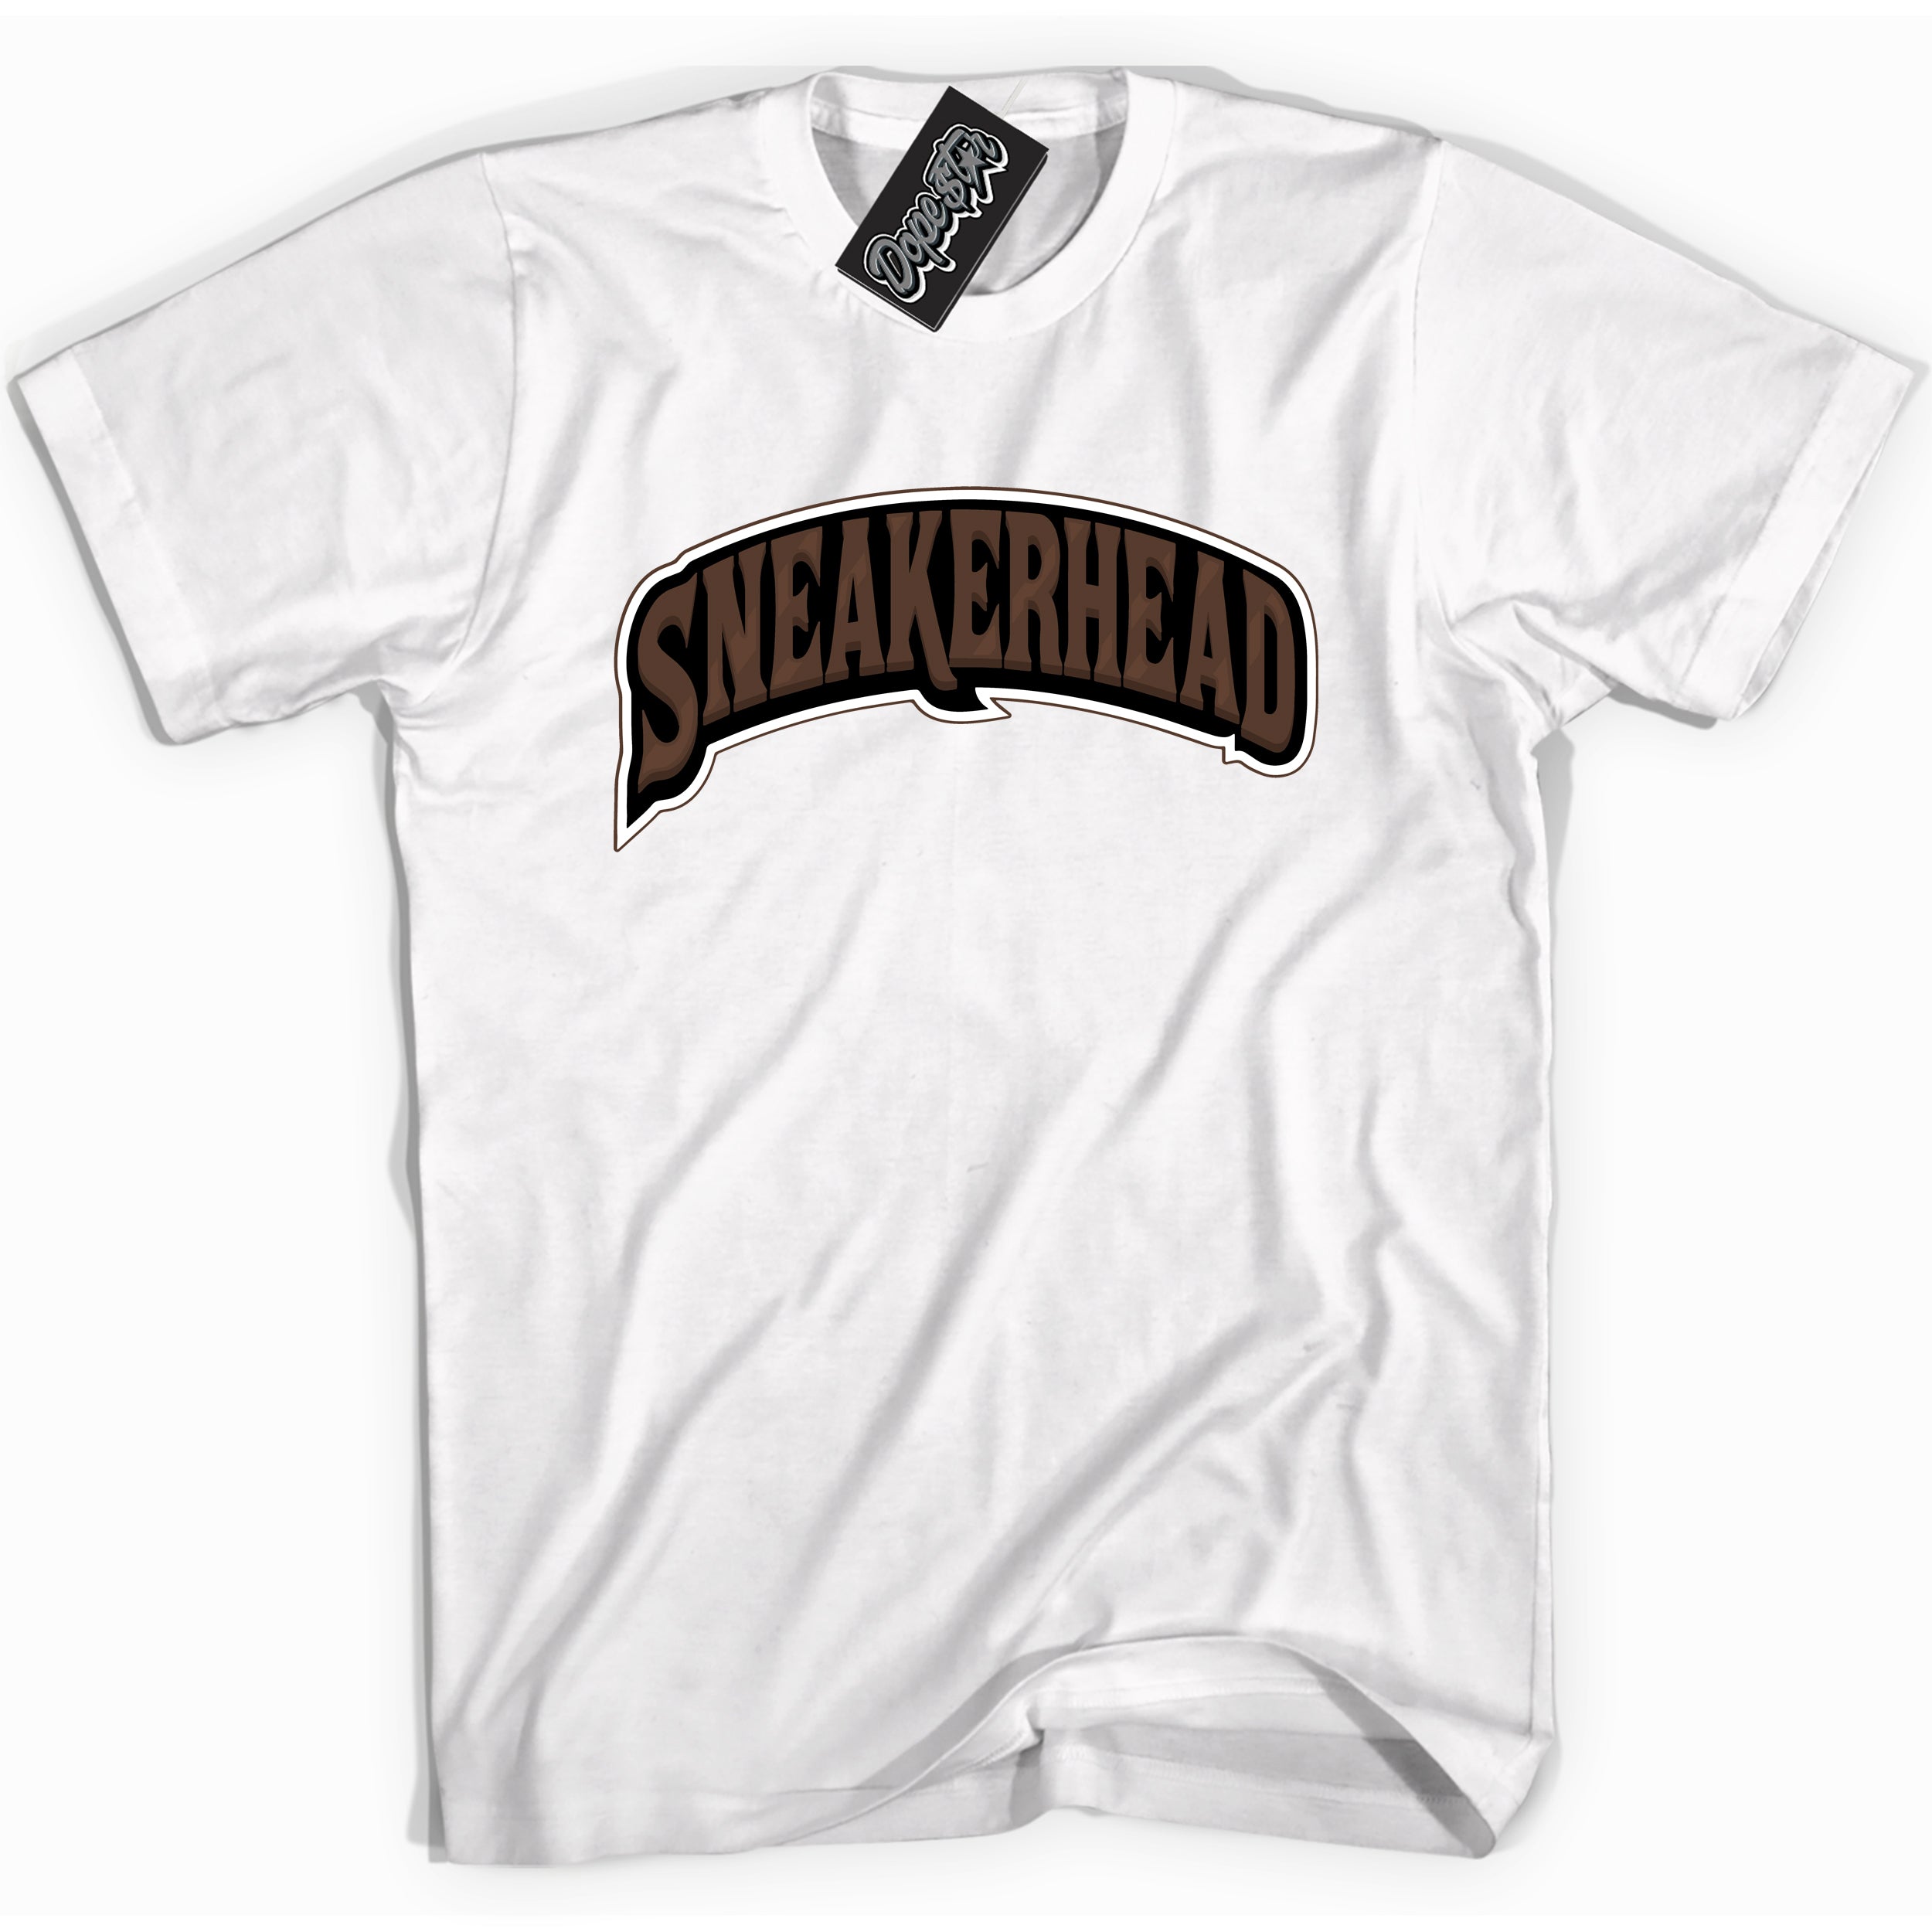 Cool White graphic tee with “ Sneakerhead ” design, that perfectly matches Palomino 1s sneakers 